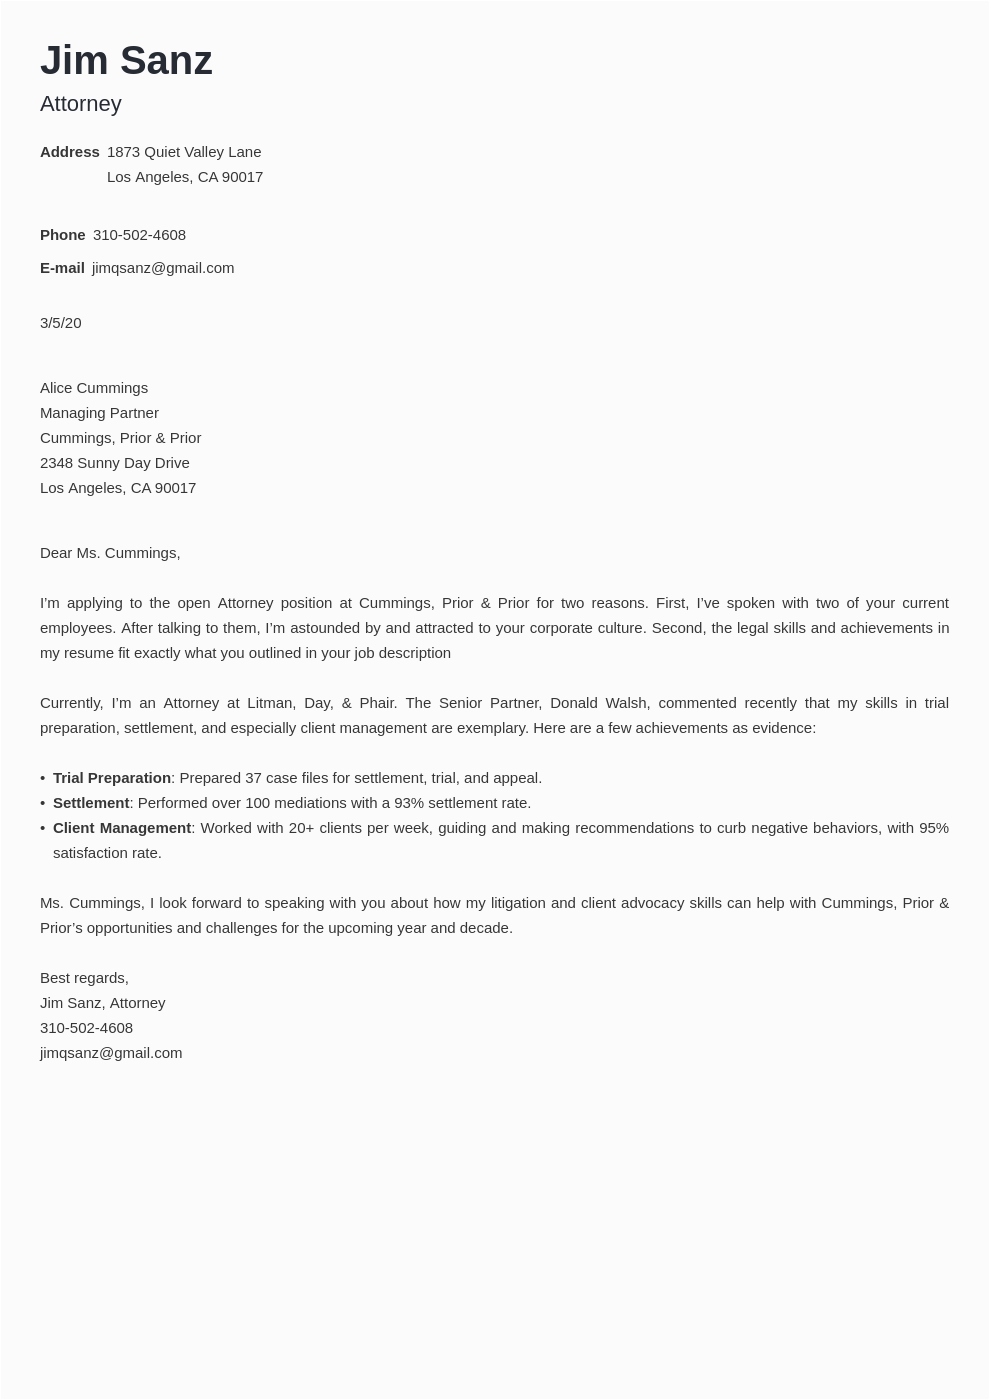 Sample Legal Cover Letter for Resume attorney Cover Letter Samples & Writing Guide